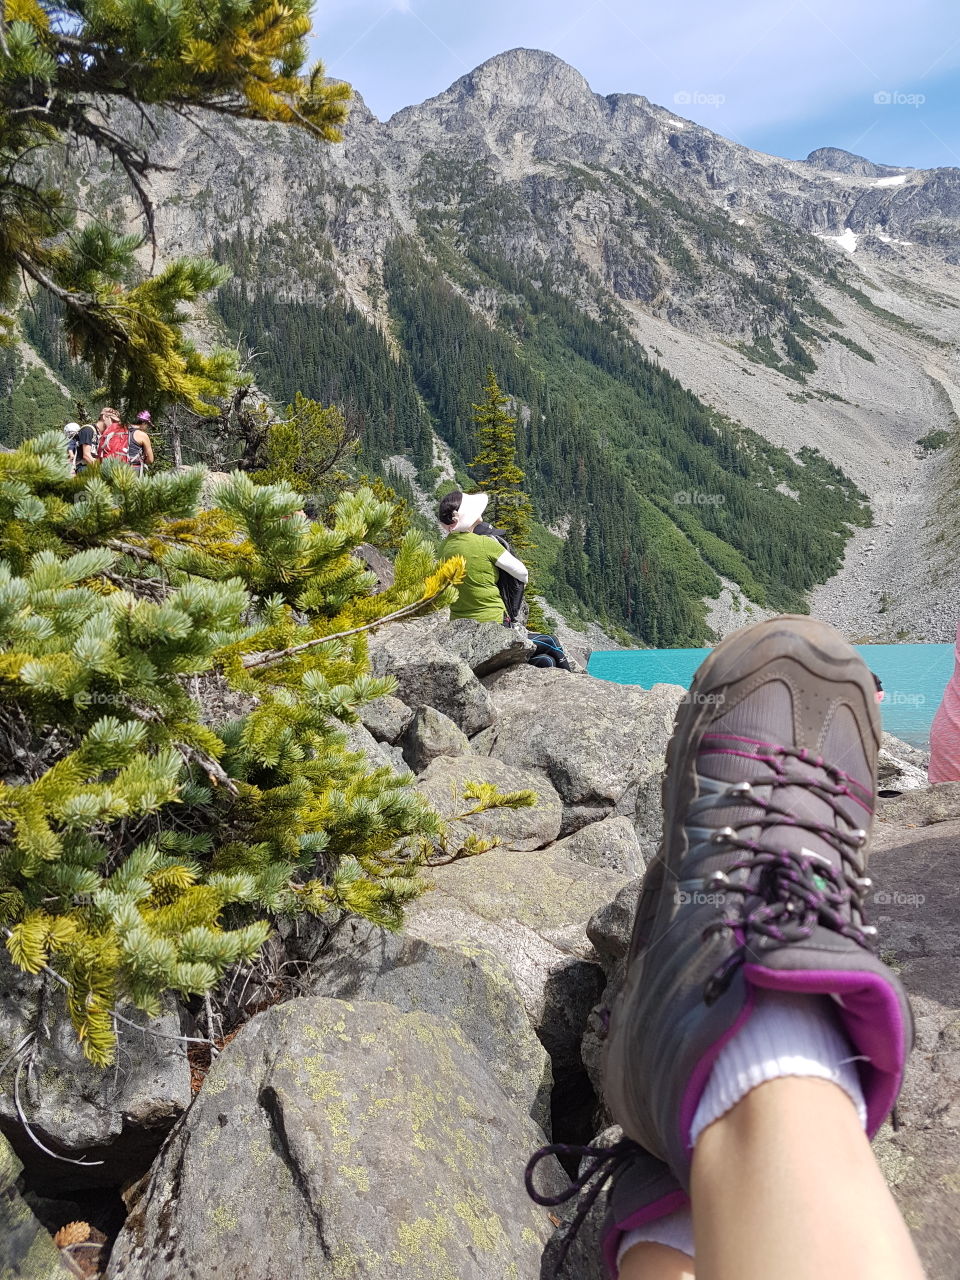 putting up the hiking boots and having a lunch break after the climb to the upper lake at Joffre Lakes near Pemberton, BC.